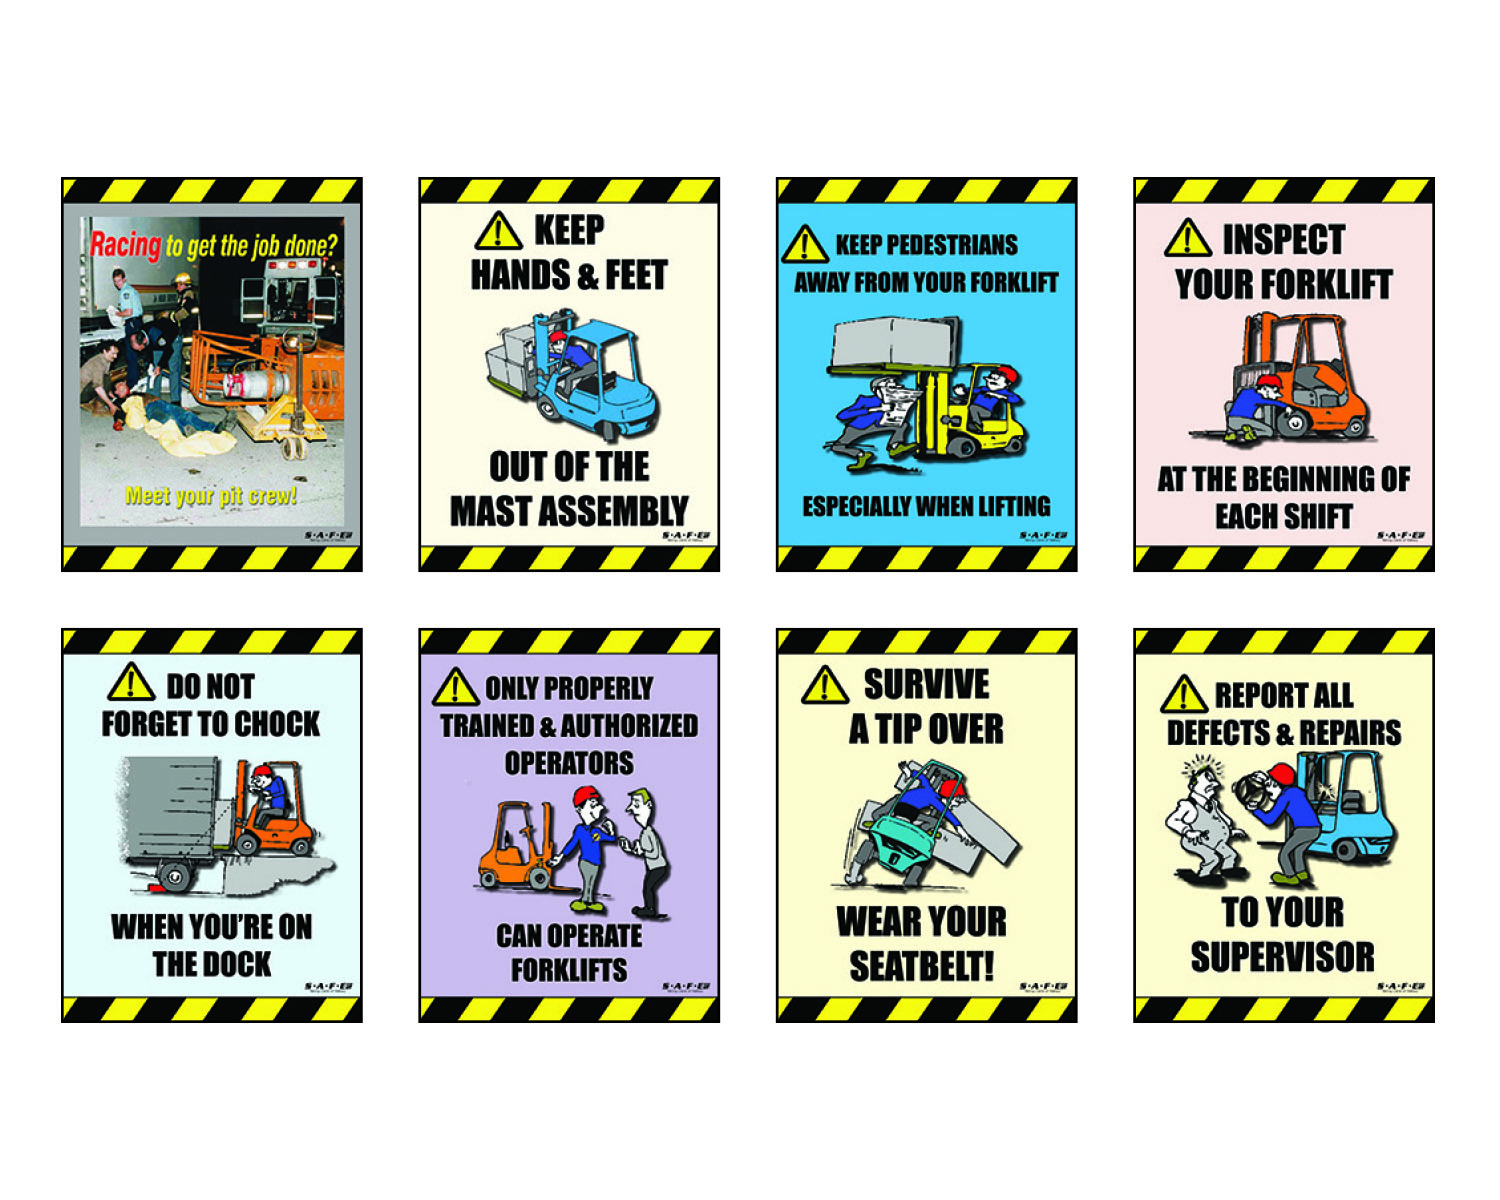 Heavy Equipment Safety Poster